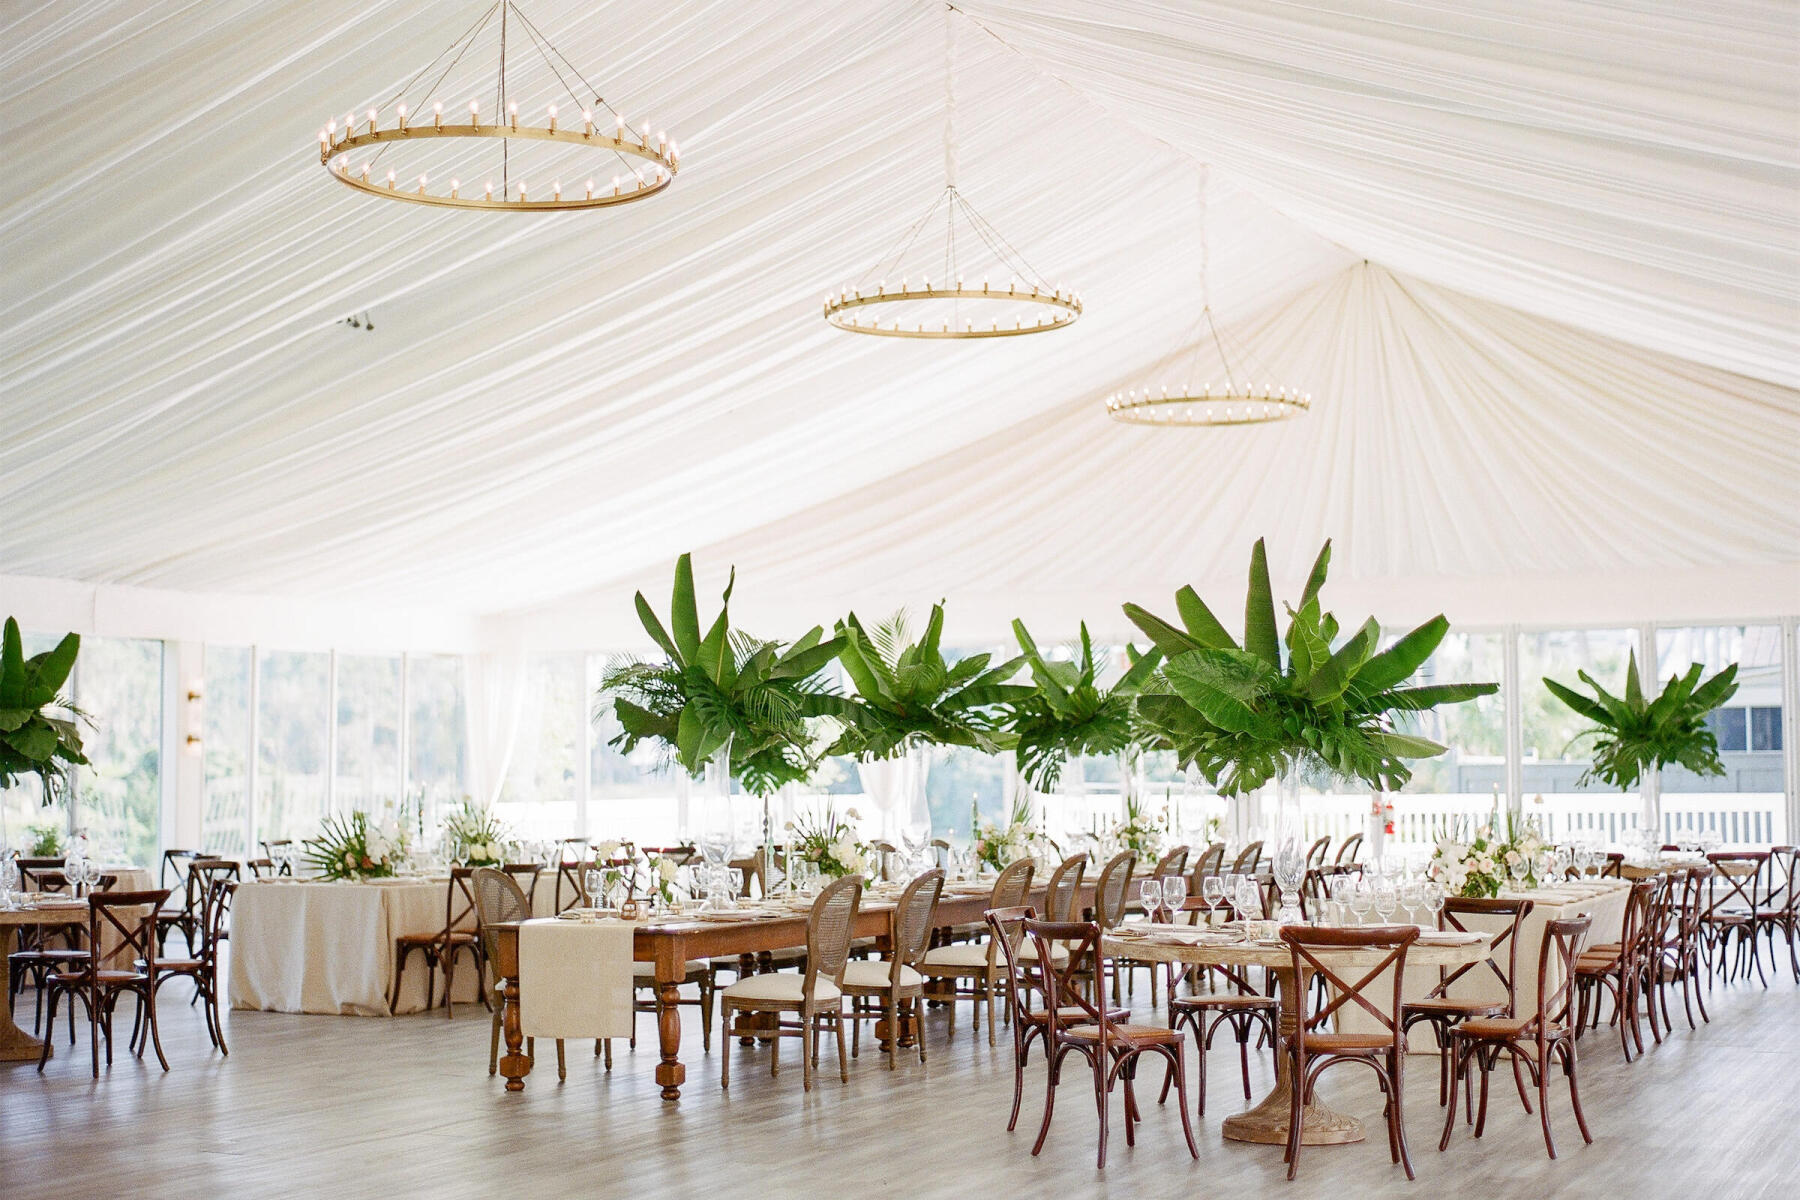 Wedding Etiquette Budget: Cream colored draped wedding reception tent with neutral tables and chairs, and centerpieces of large palm fronds.